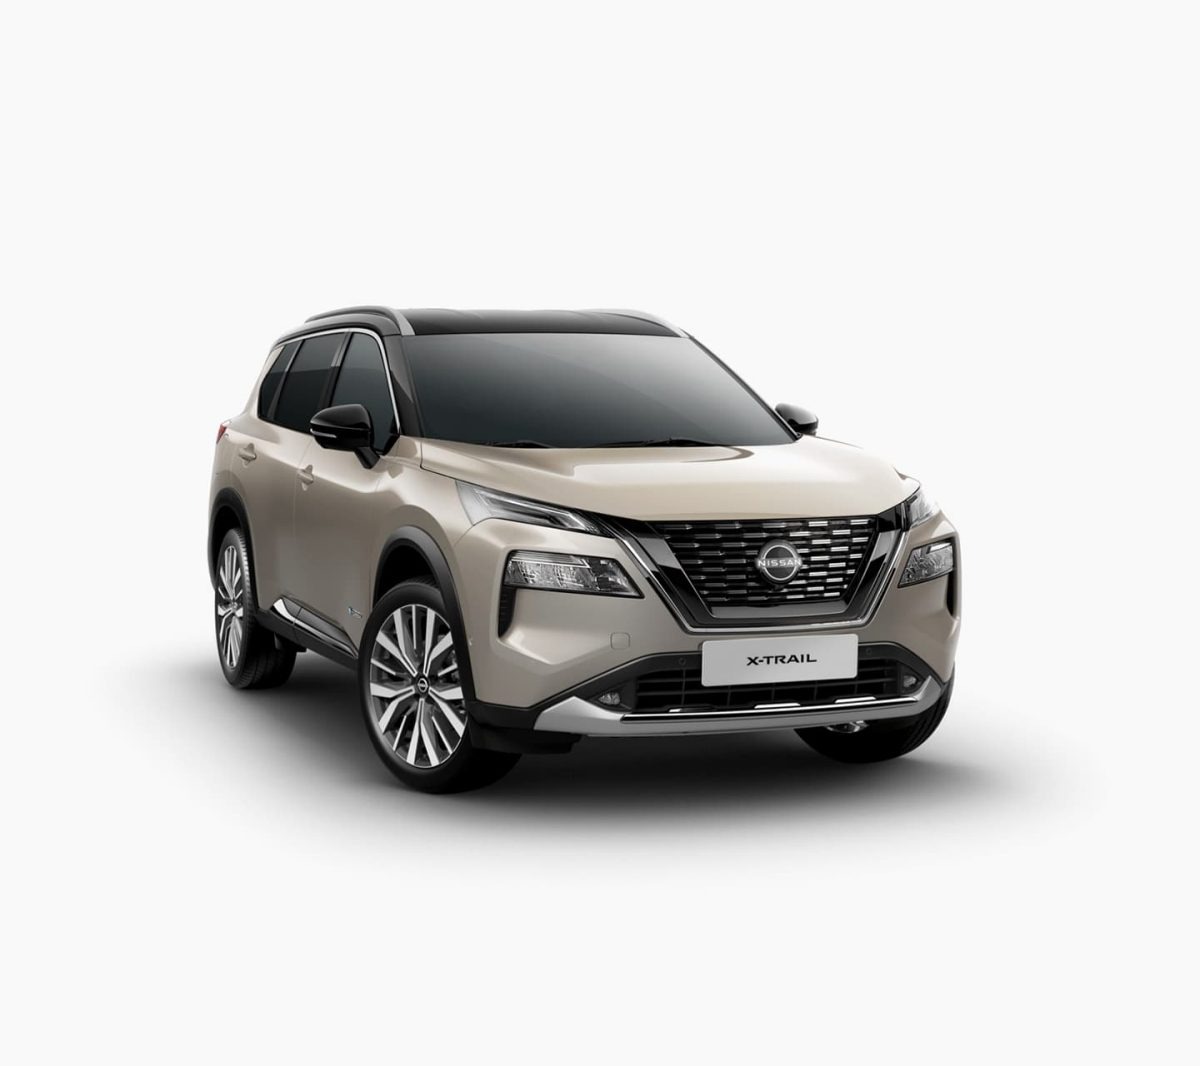 All-new Nissan X-TRAIL grades - Find your perfect family SUV